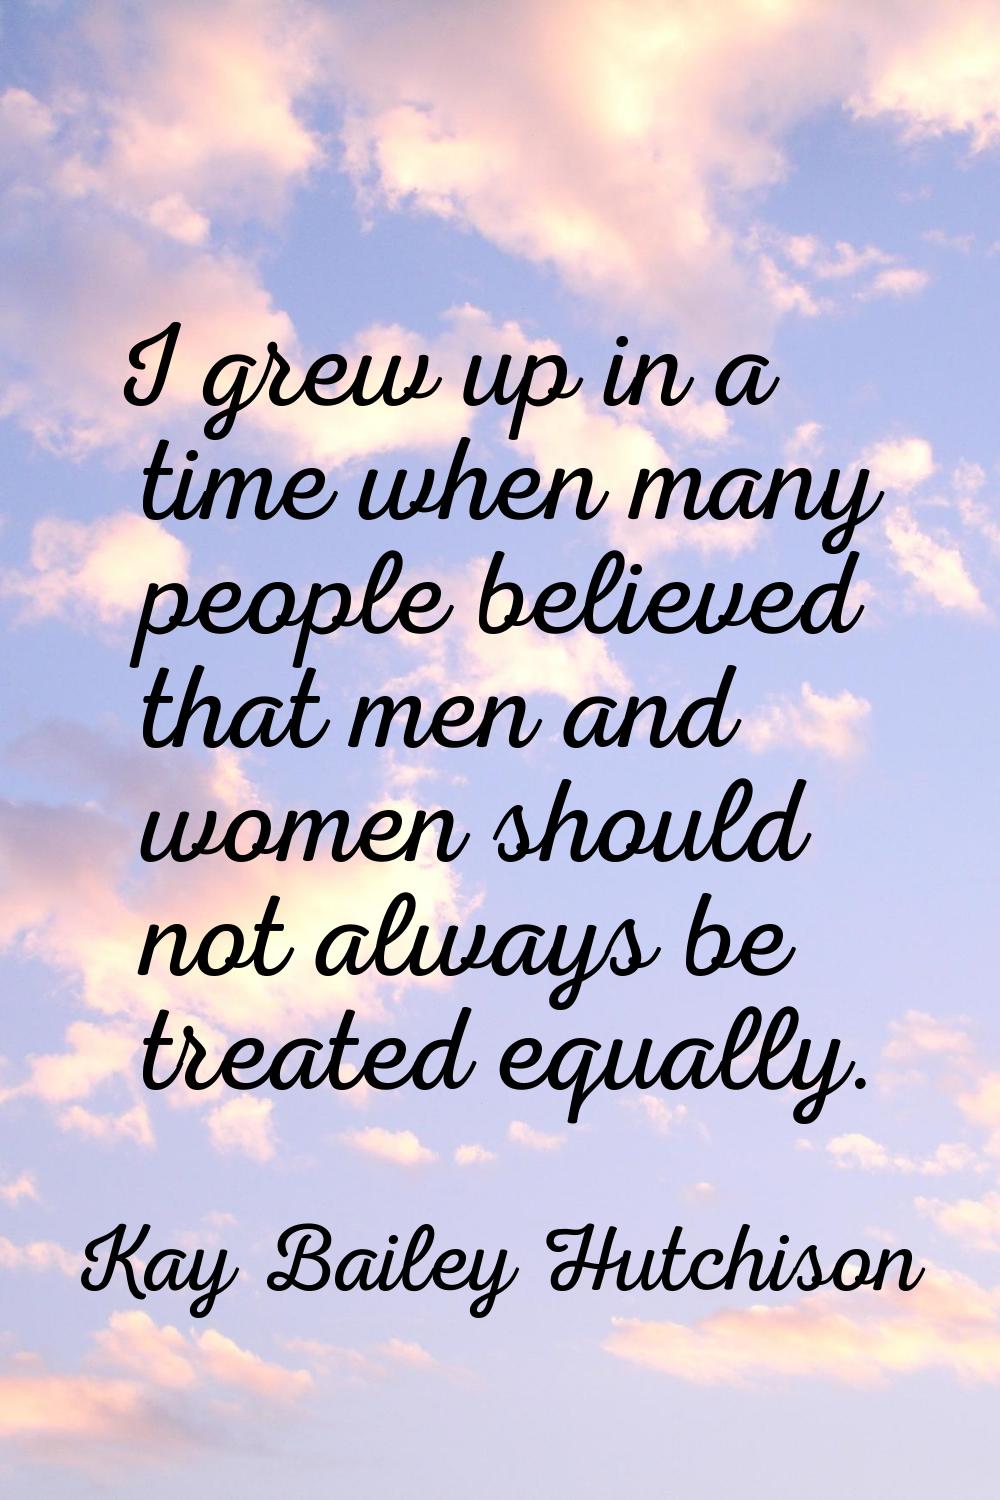 I grew up in a time when many people believed that men and women should not always be treated equal